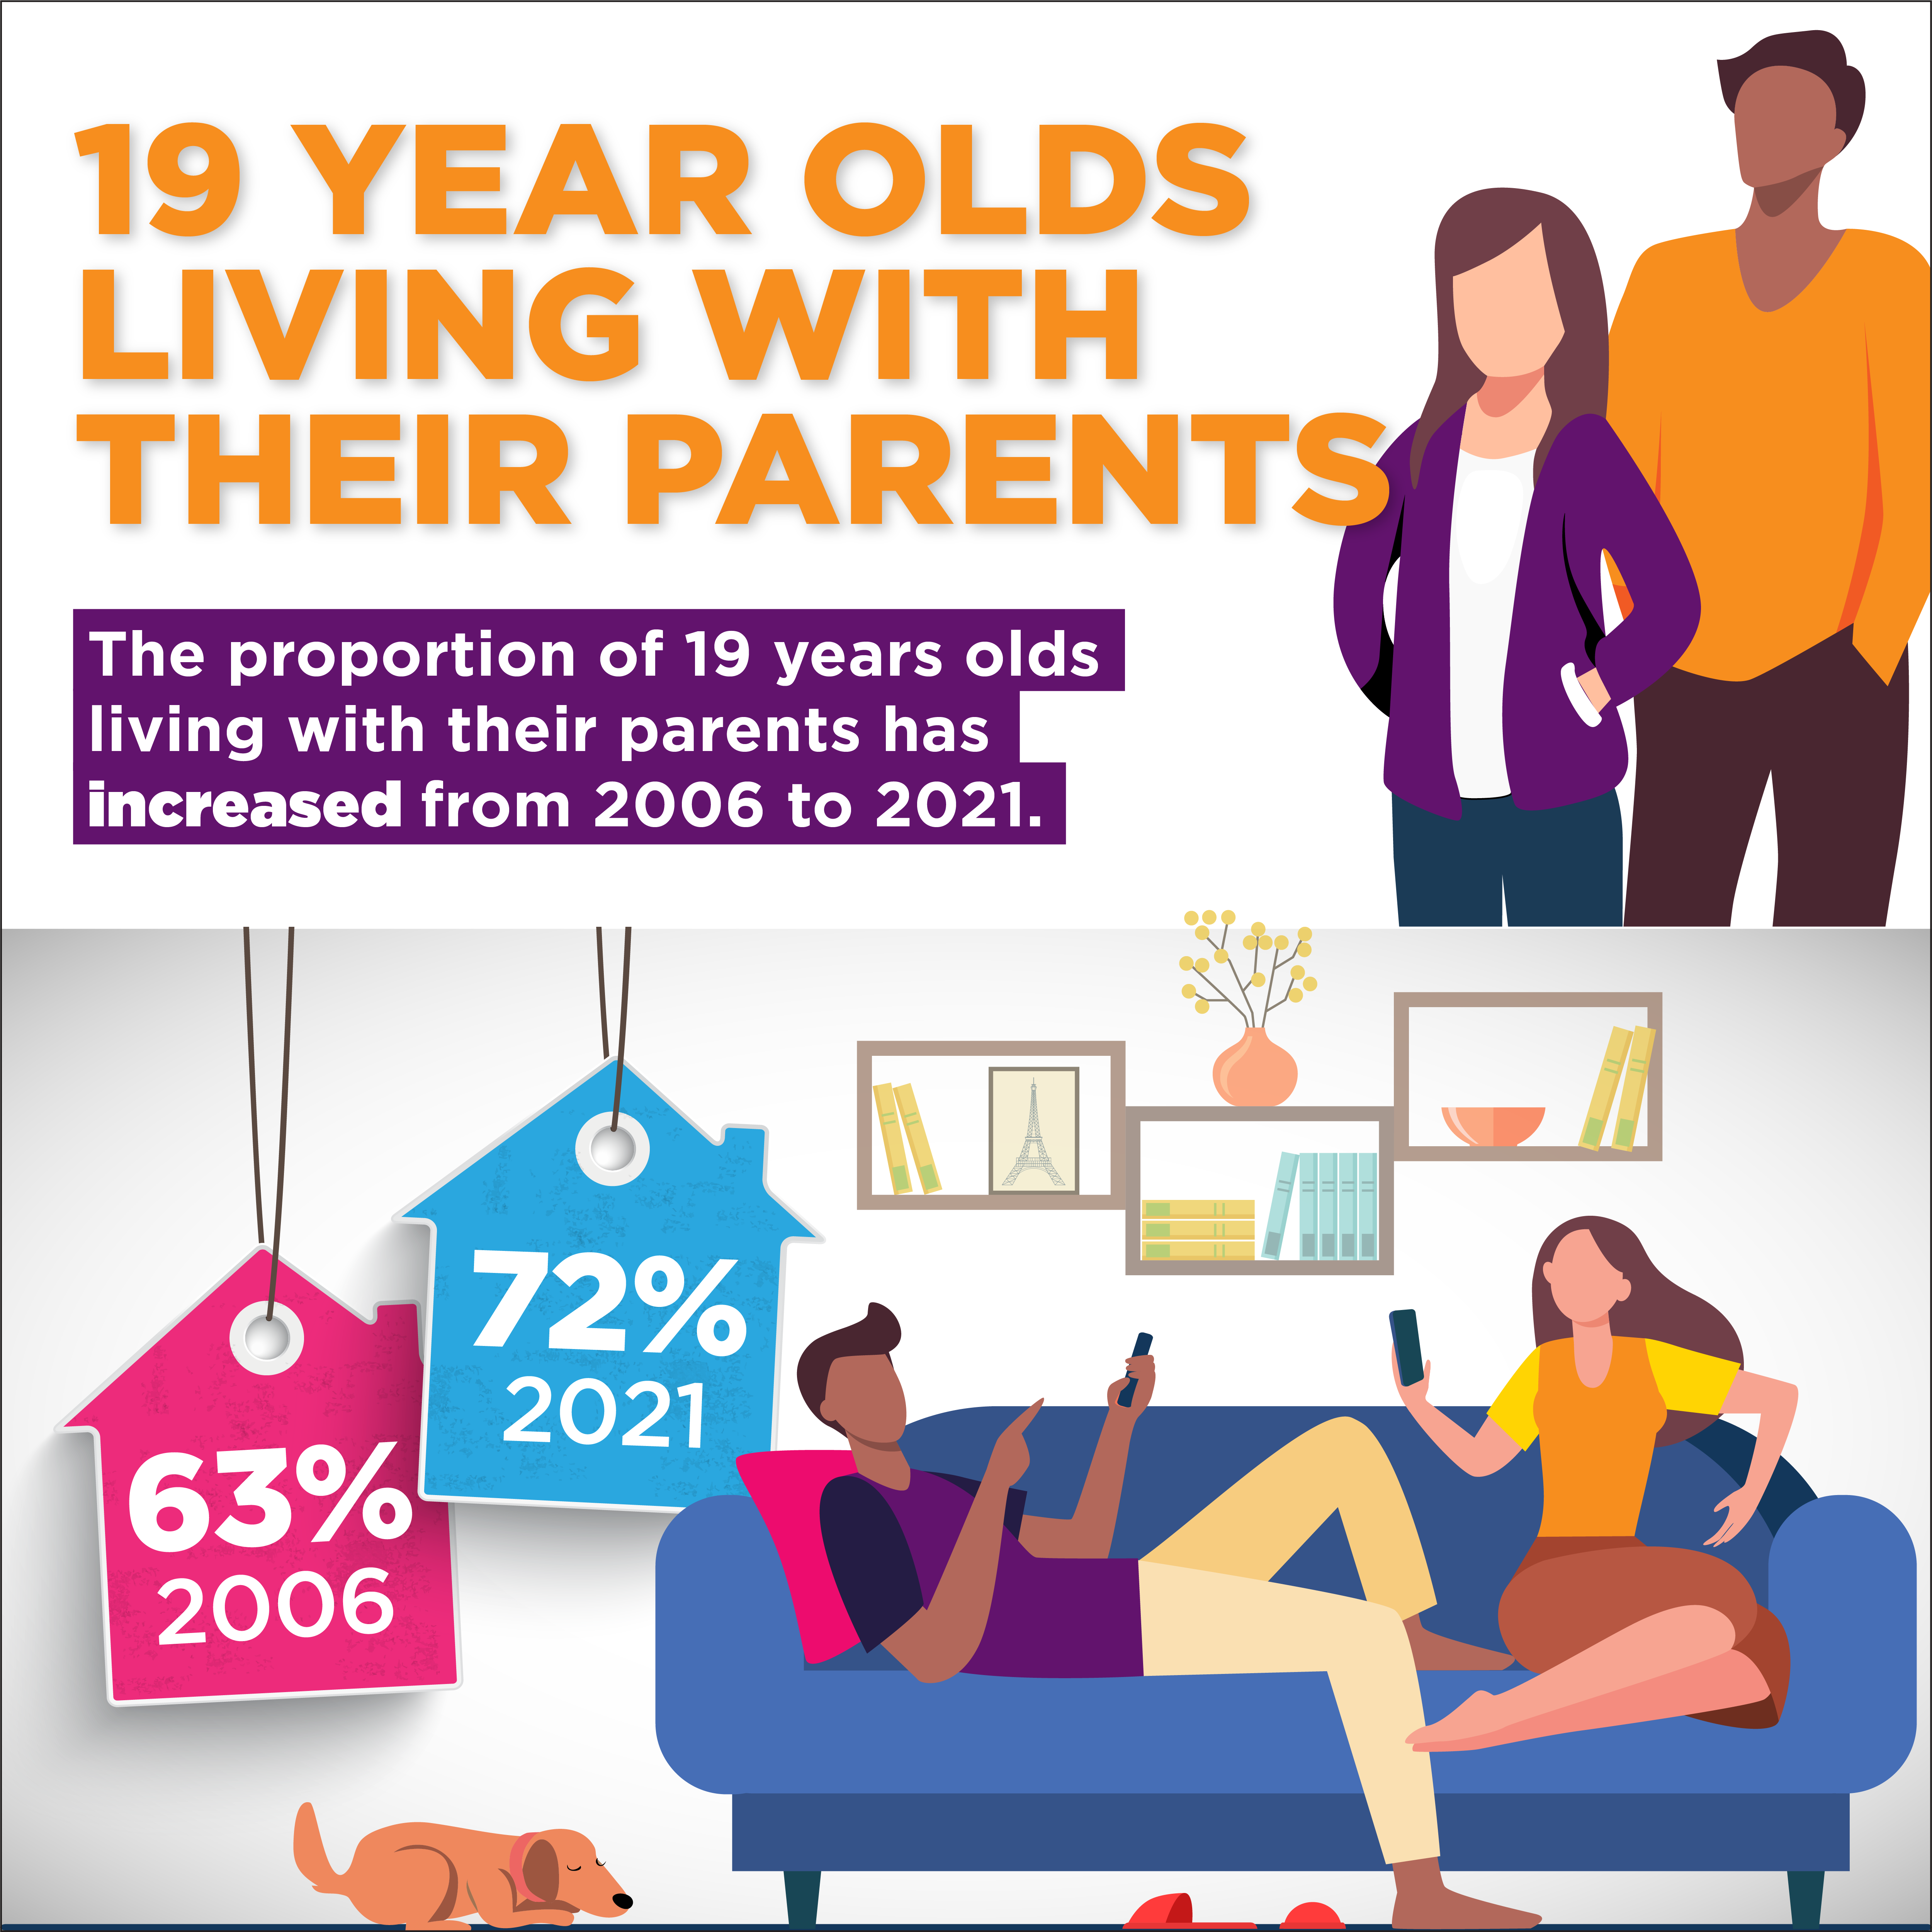 Infographic: The proportion of 19 year olds living with their parents has increased from 2006 to 2021.